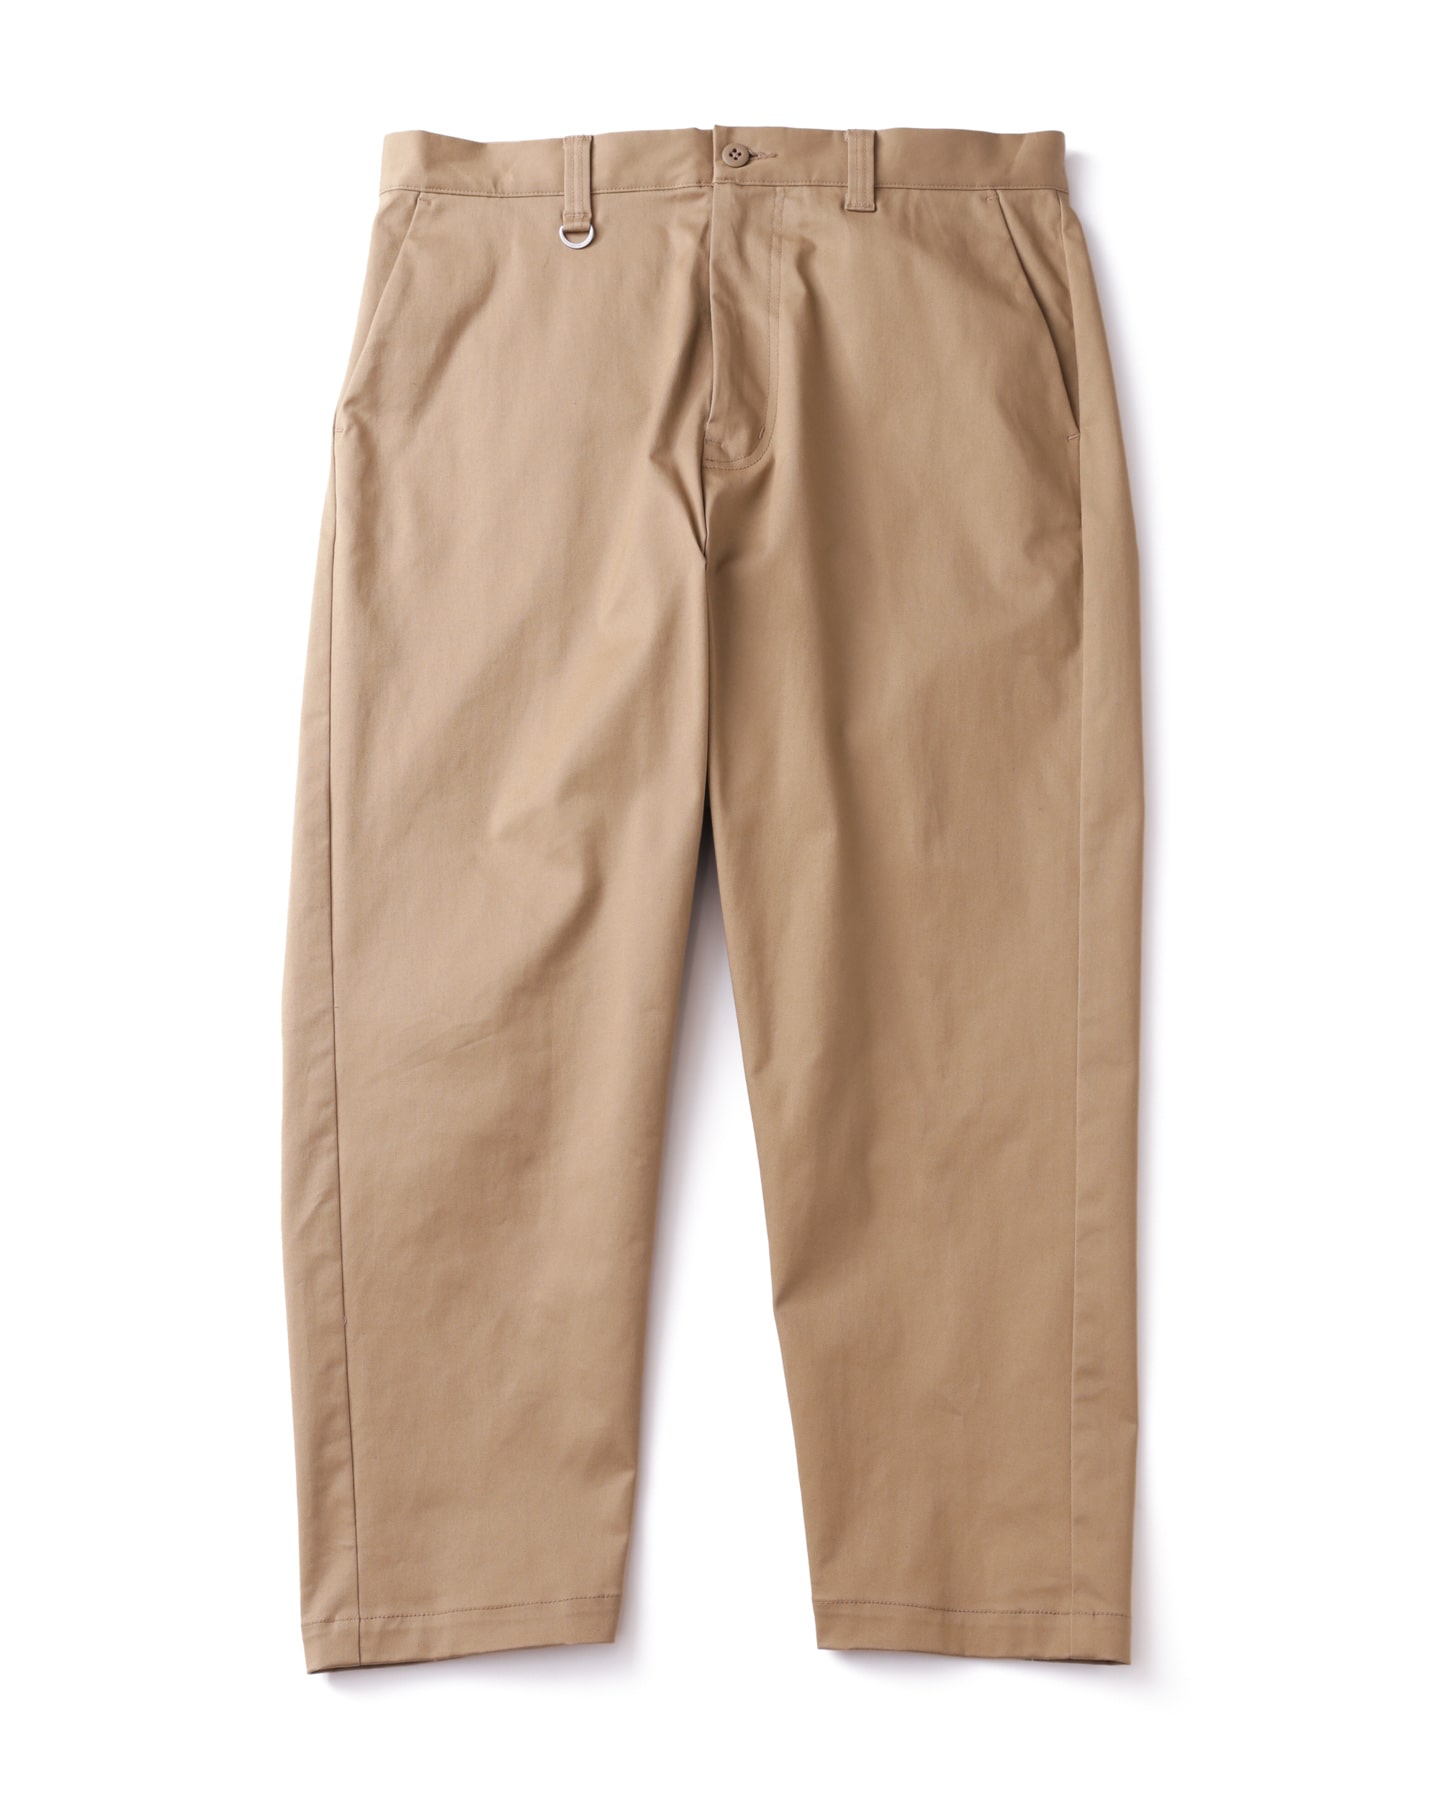 STRETCH CHINO WIDE CROPPED PANTS(M BEIGE) - SOPH.